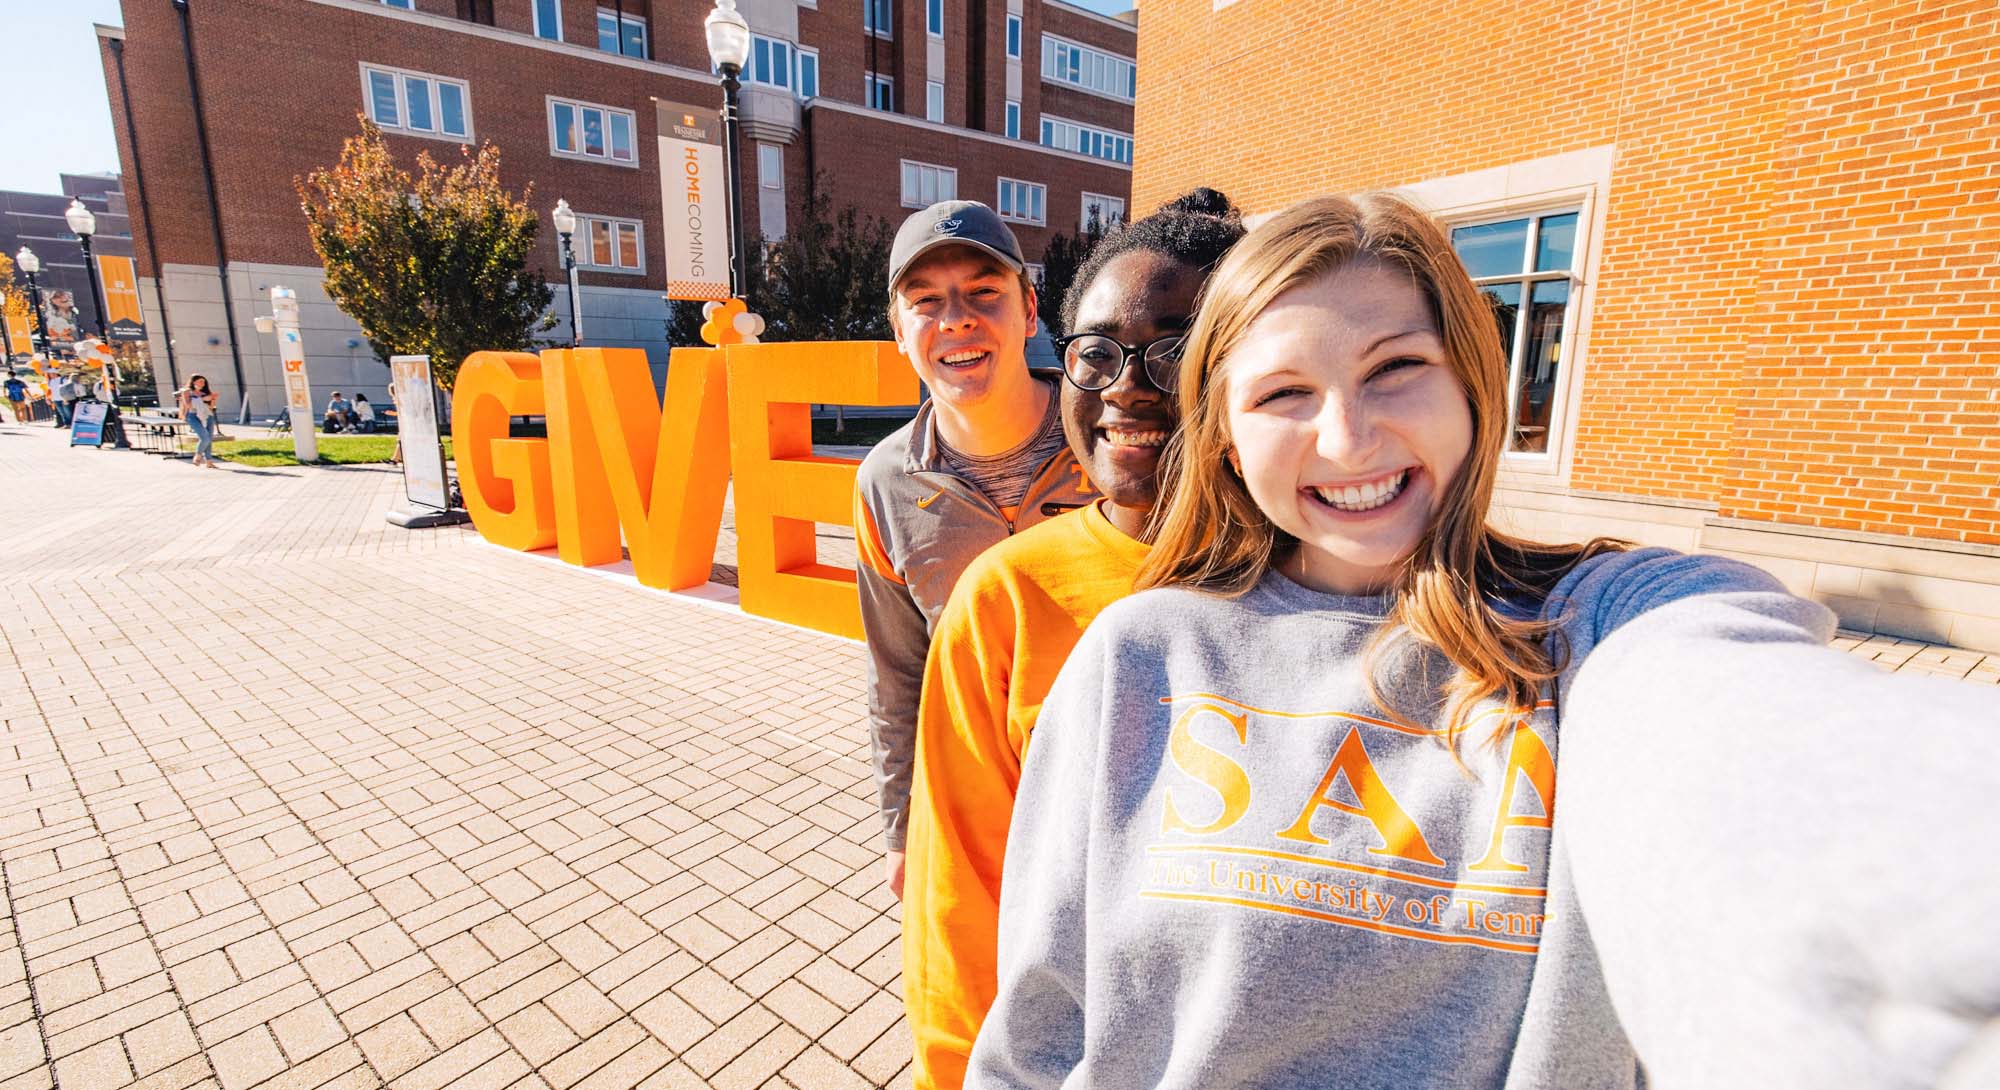 Students standing in front of GIVE sign